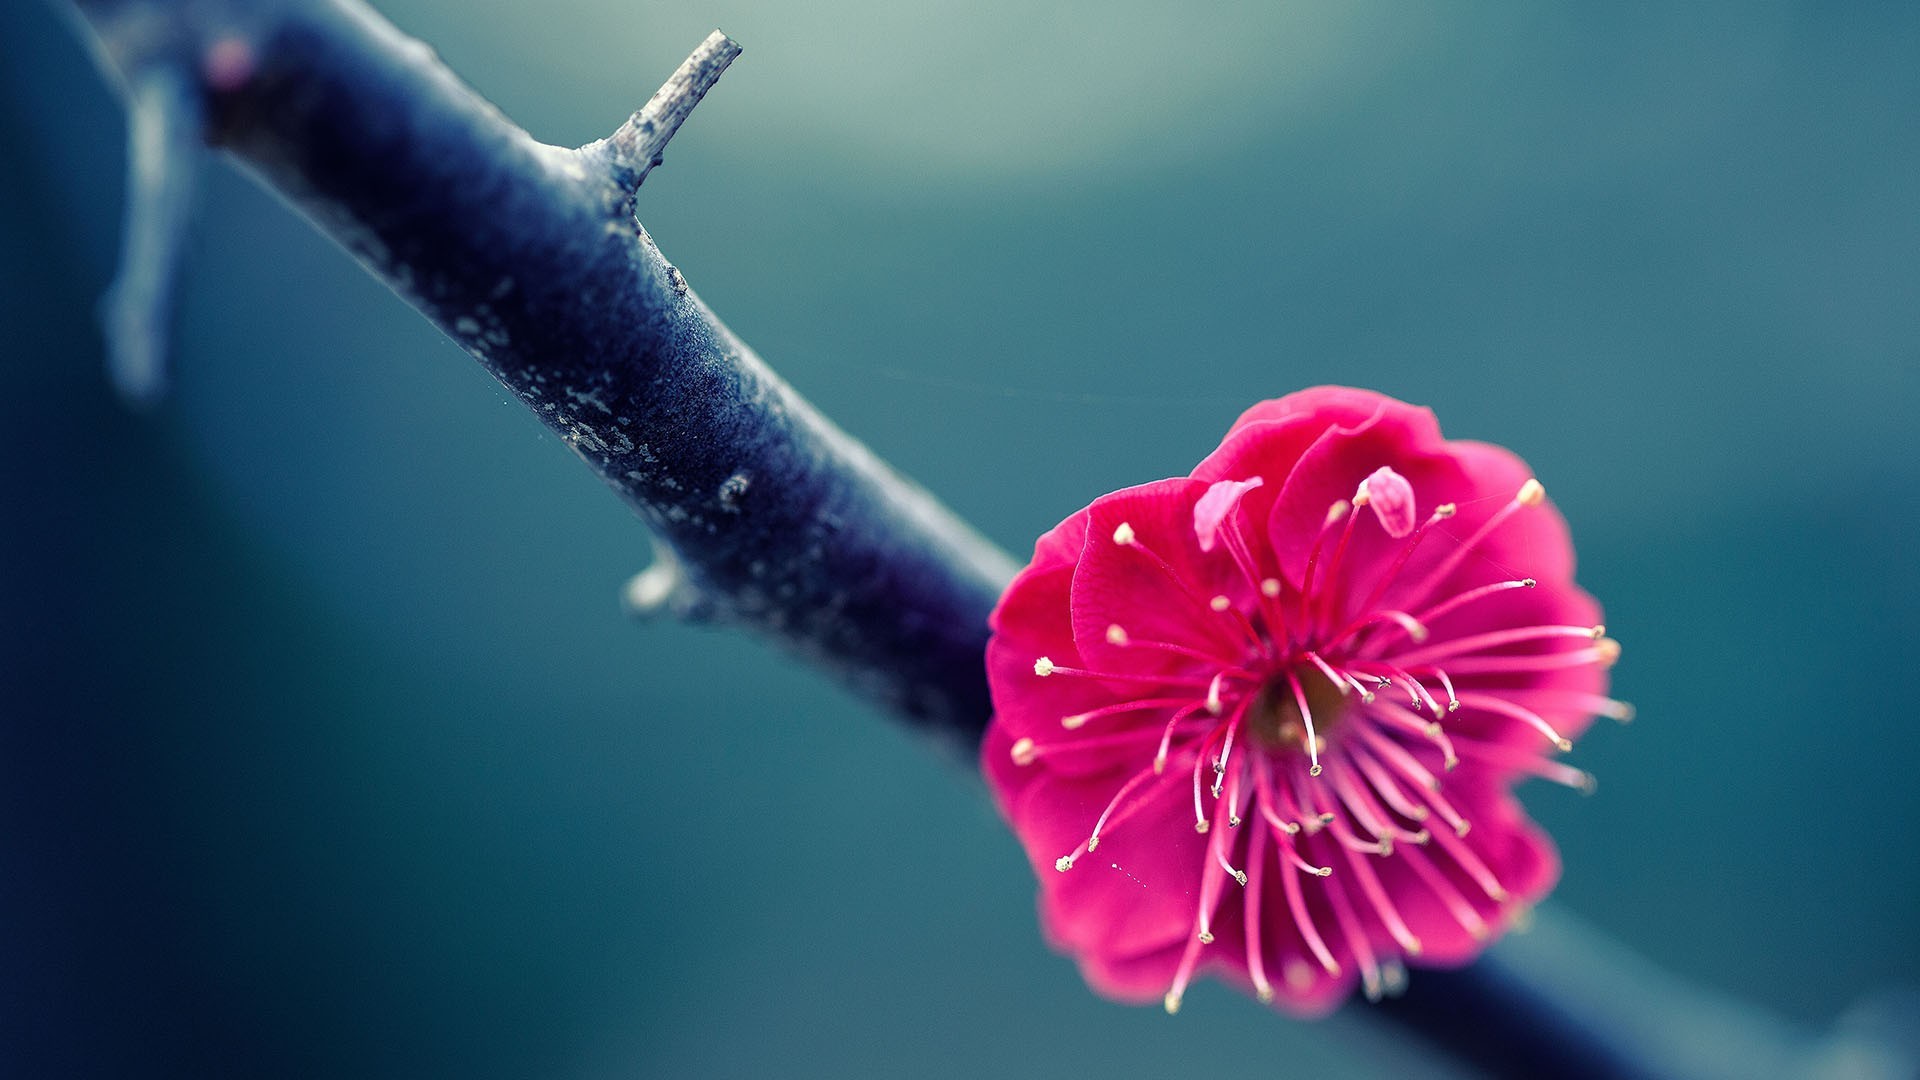 1920x1080 Flower Wallpaper Pink High Quality Resolution | Natures Wallpapers .